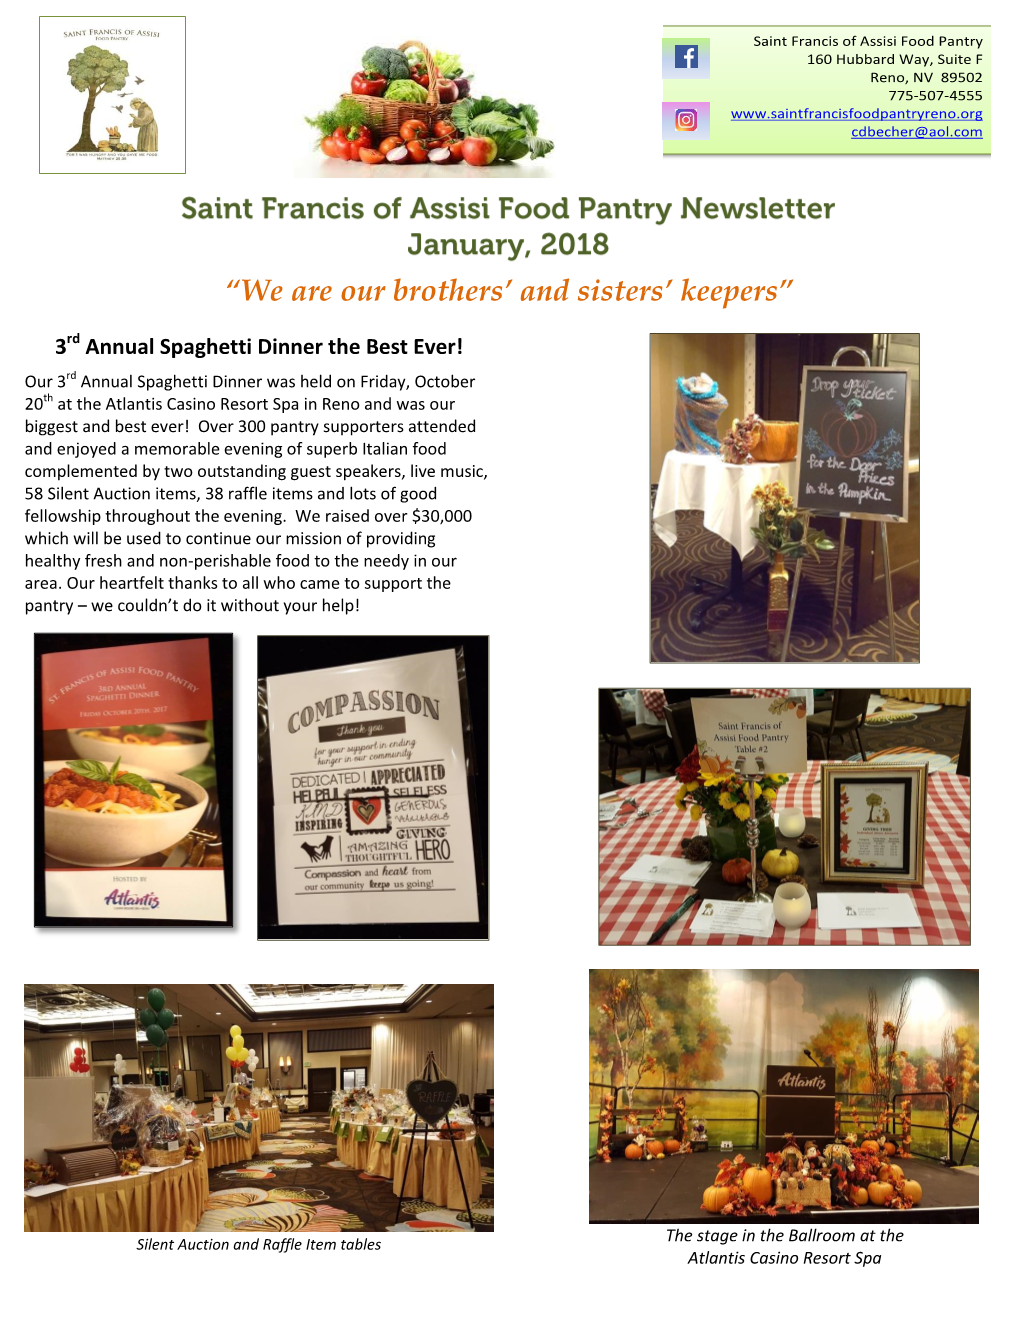 St Francis of Assisi Newsletter